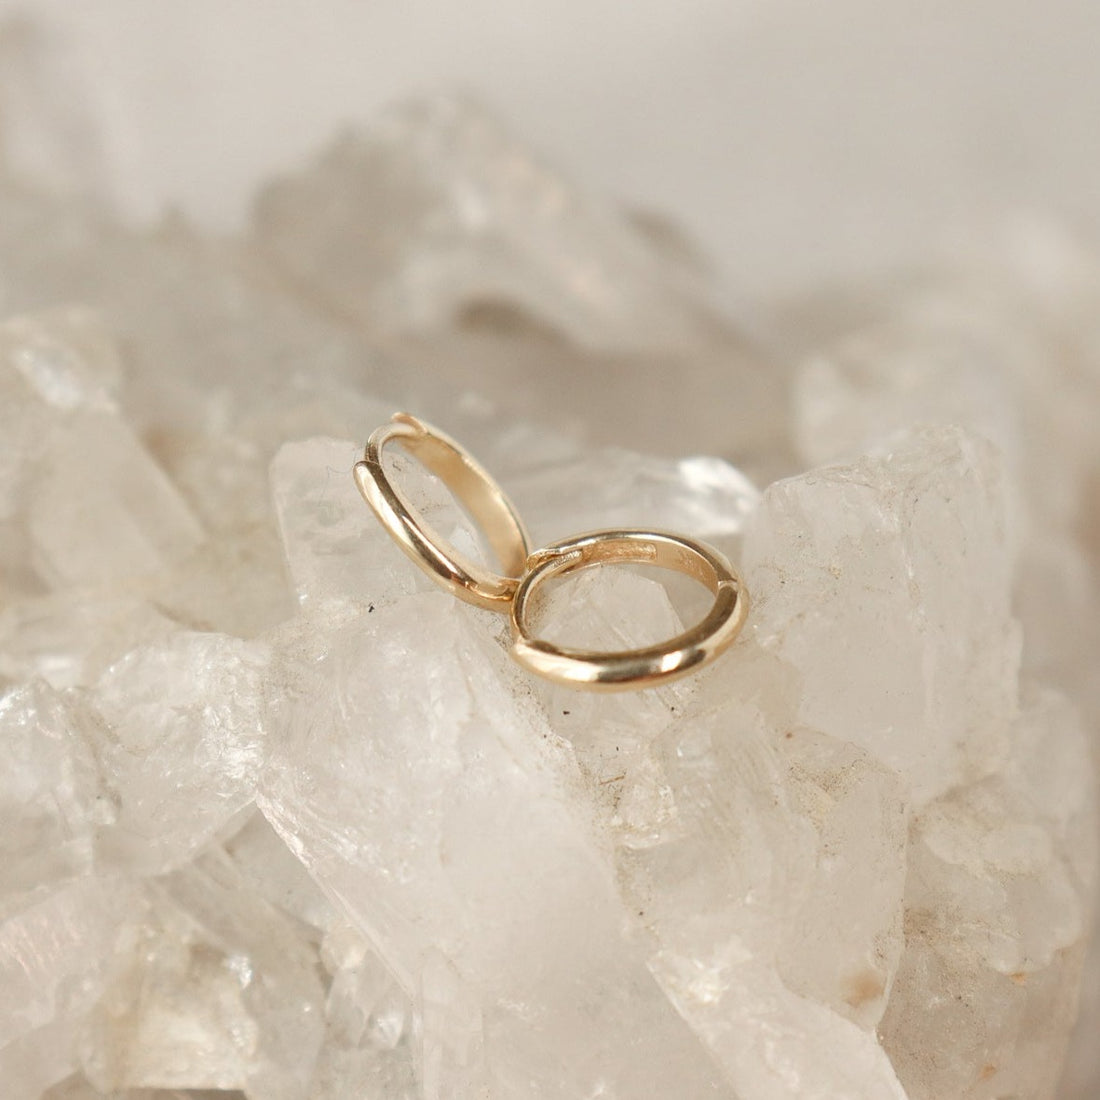 A pair of plain 14k gold huggie hoops are laid out on a crystal background.